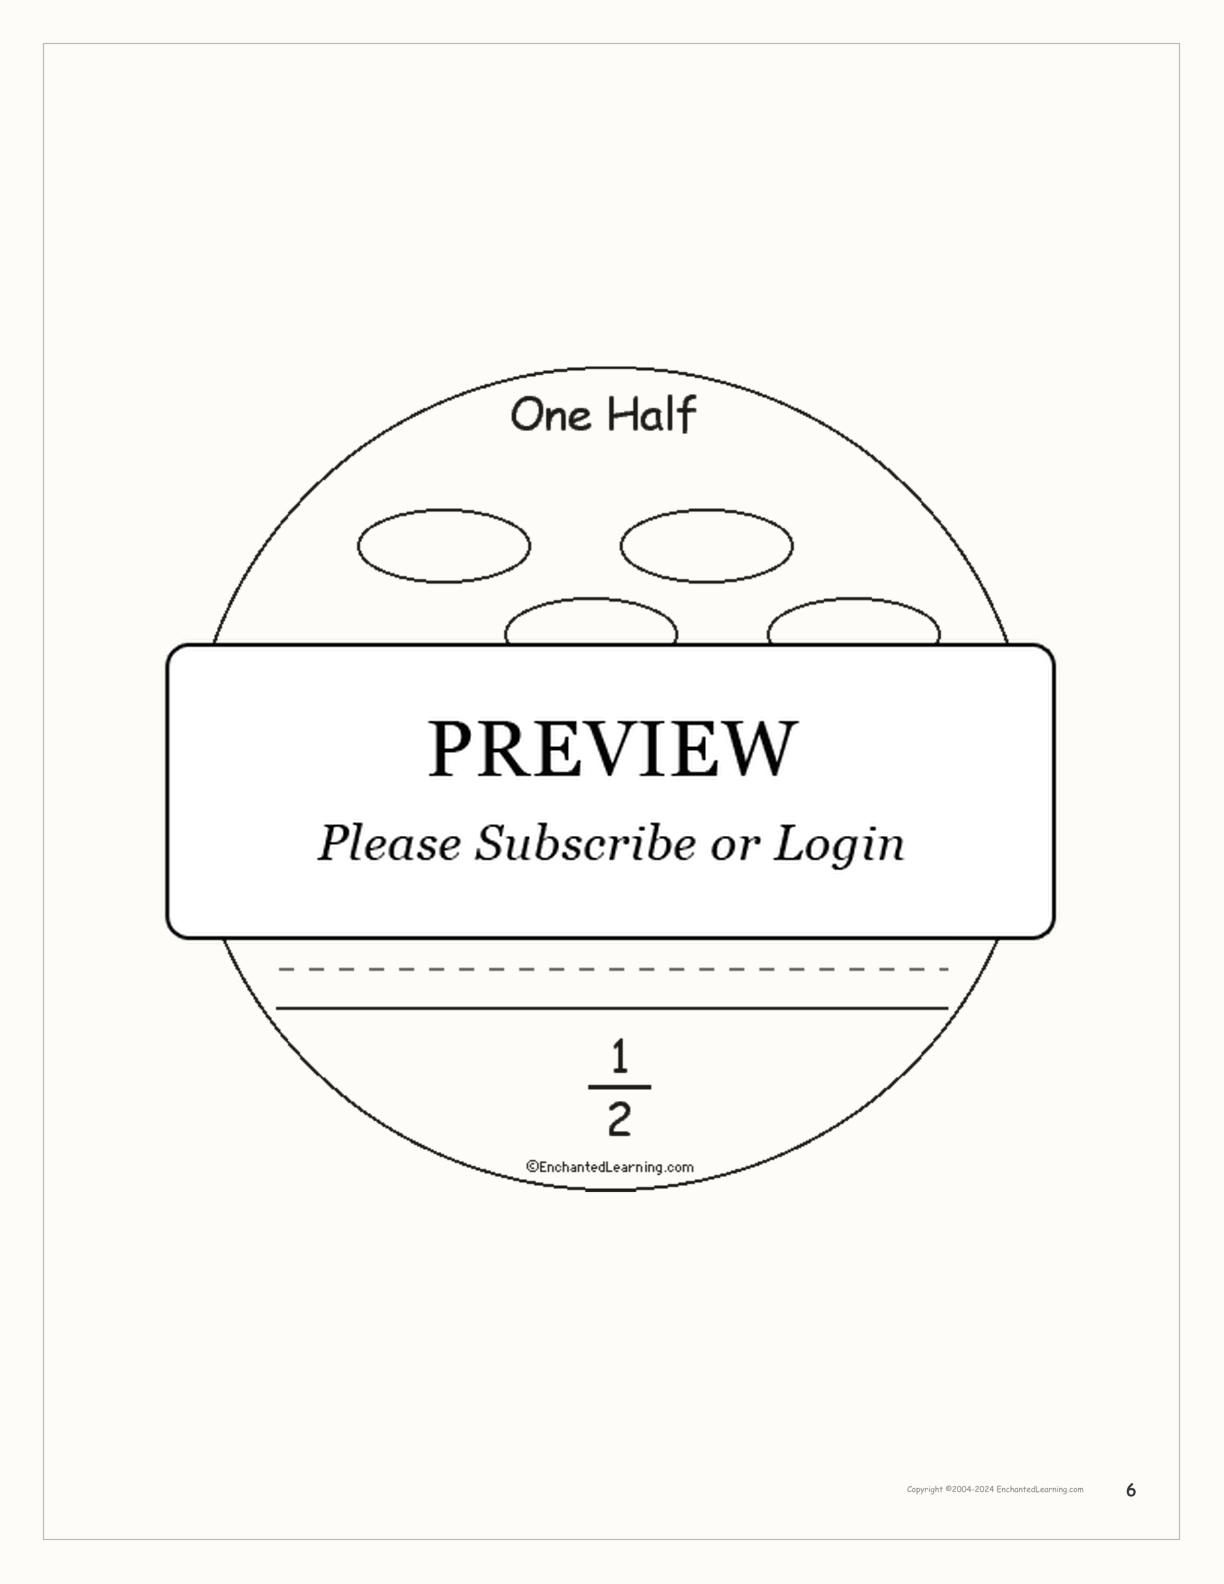 One Half: A Book on Fractions interactive printout page 6